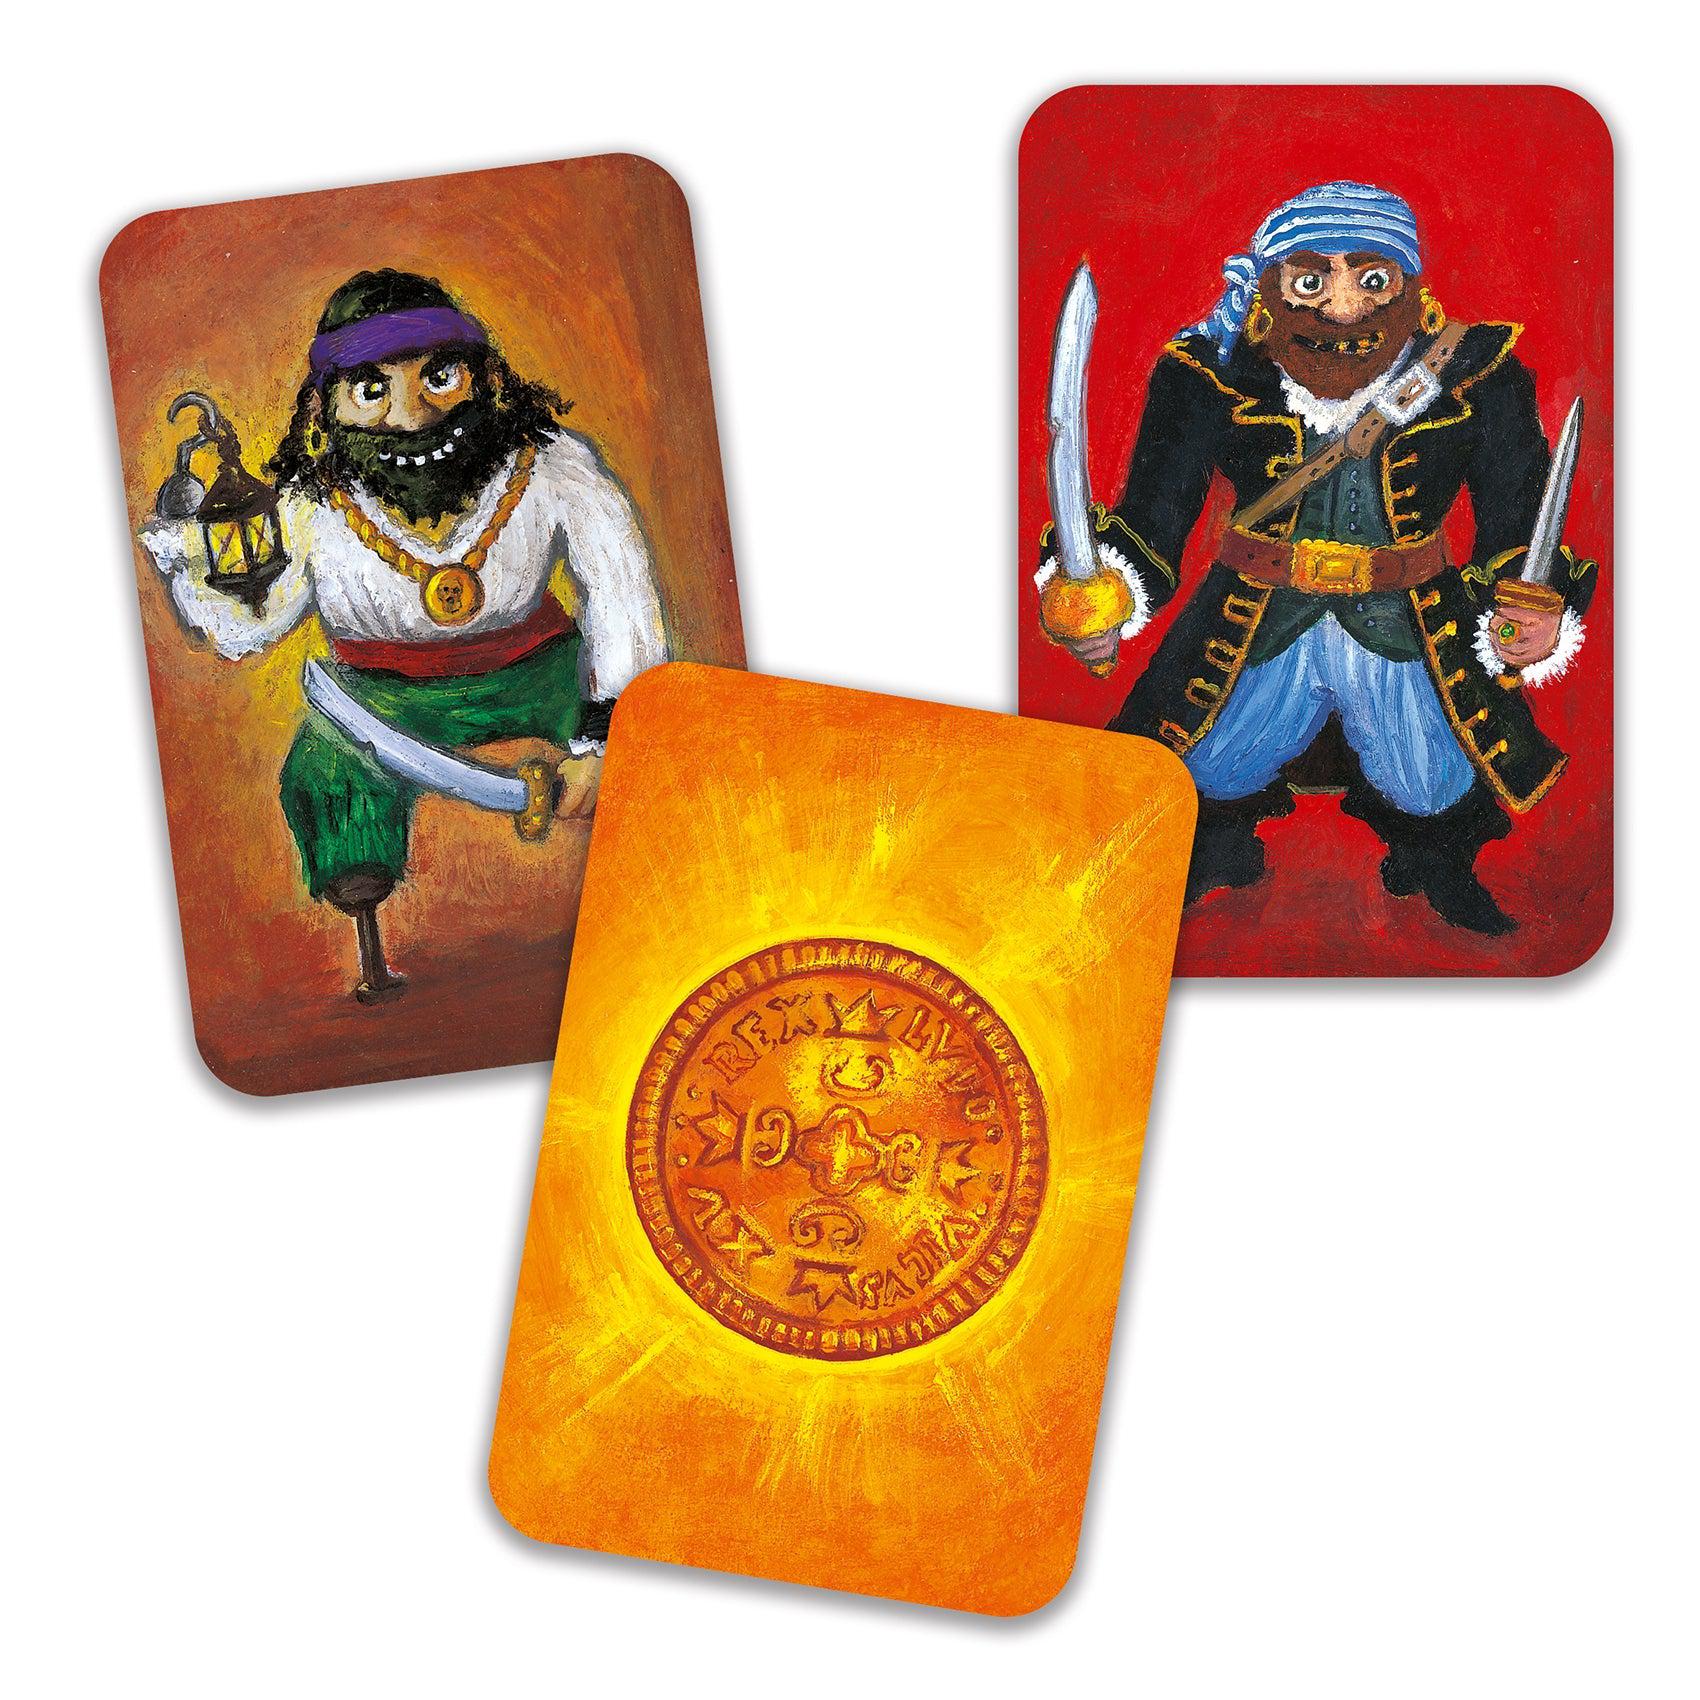 Front view of the Piratatak Adventure and Strategy Playing Card Game in the box. 